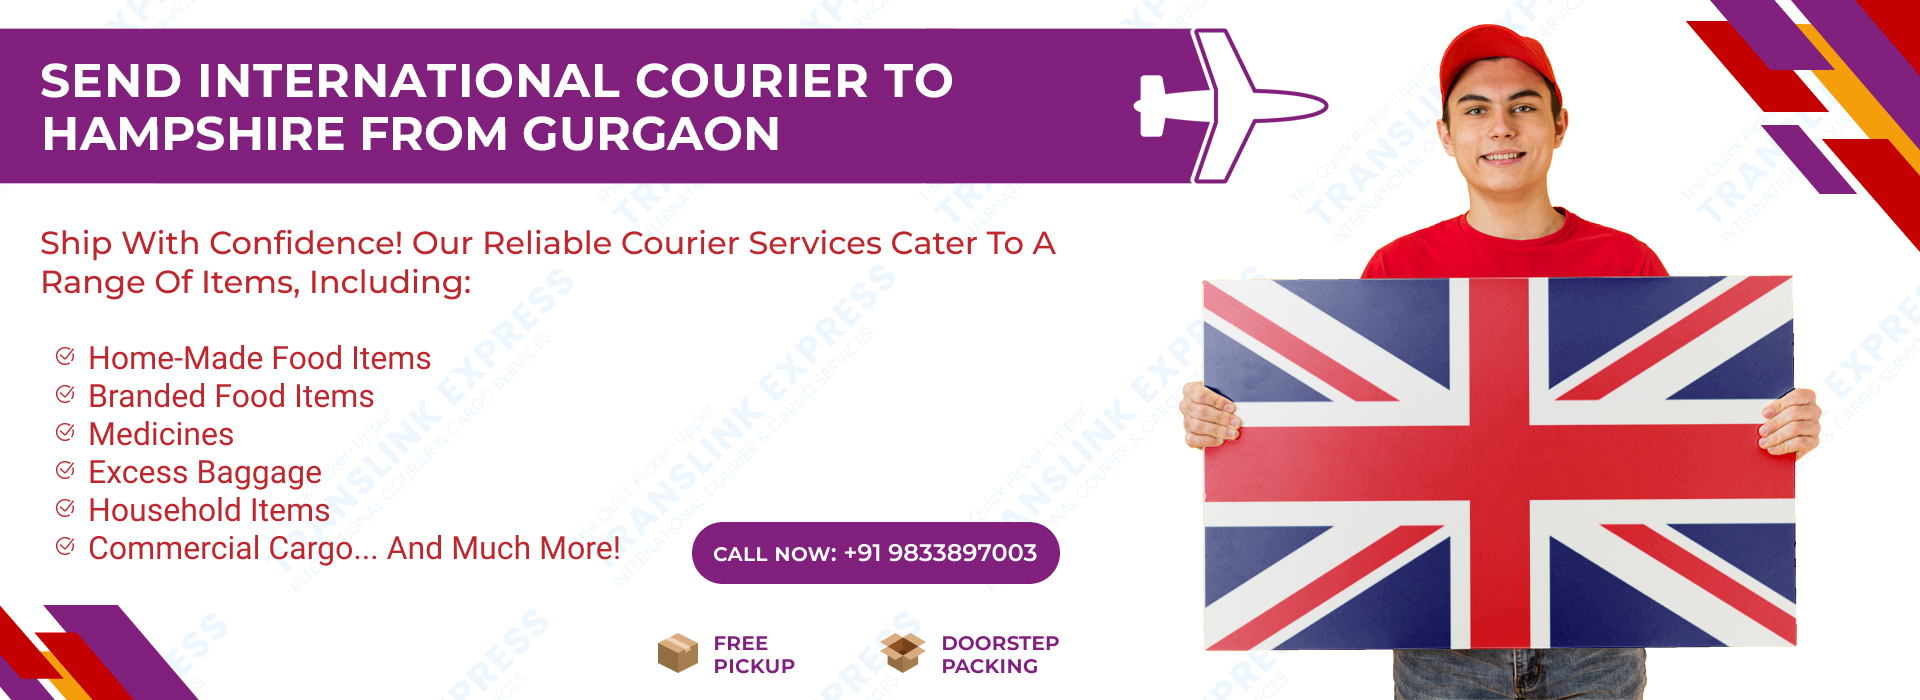 Courier to Hampshire From Gurgaon